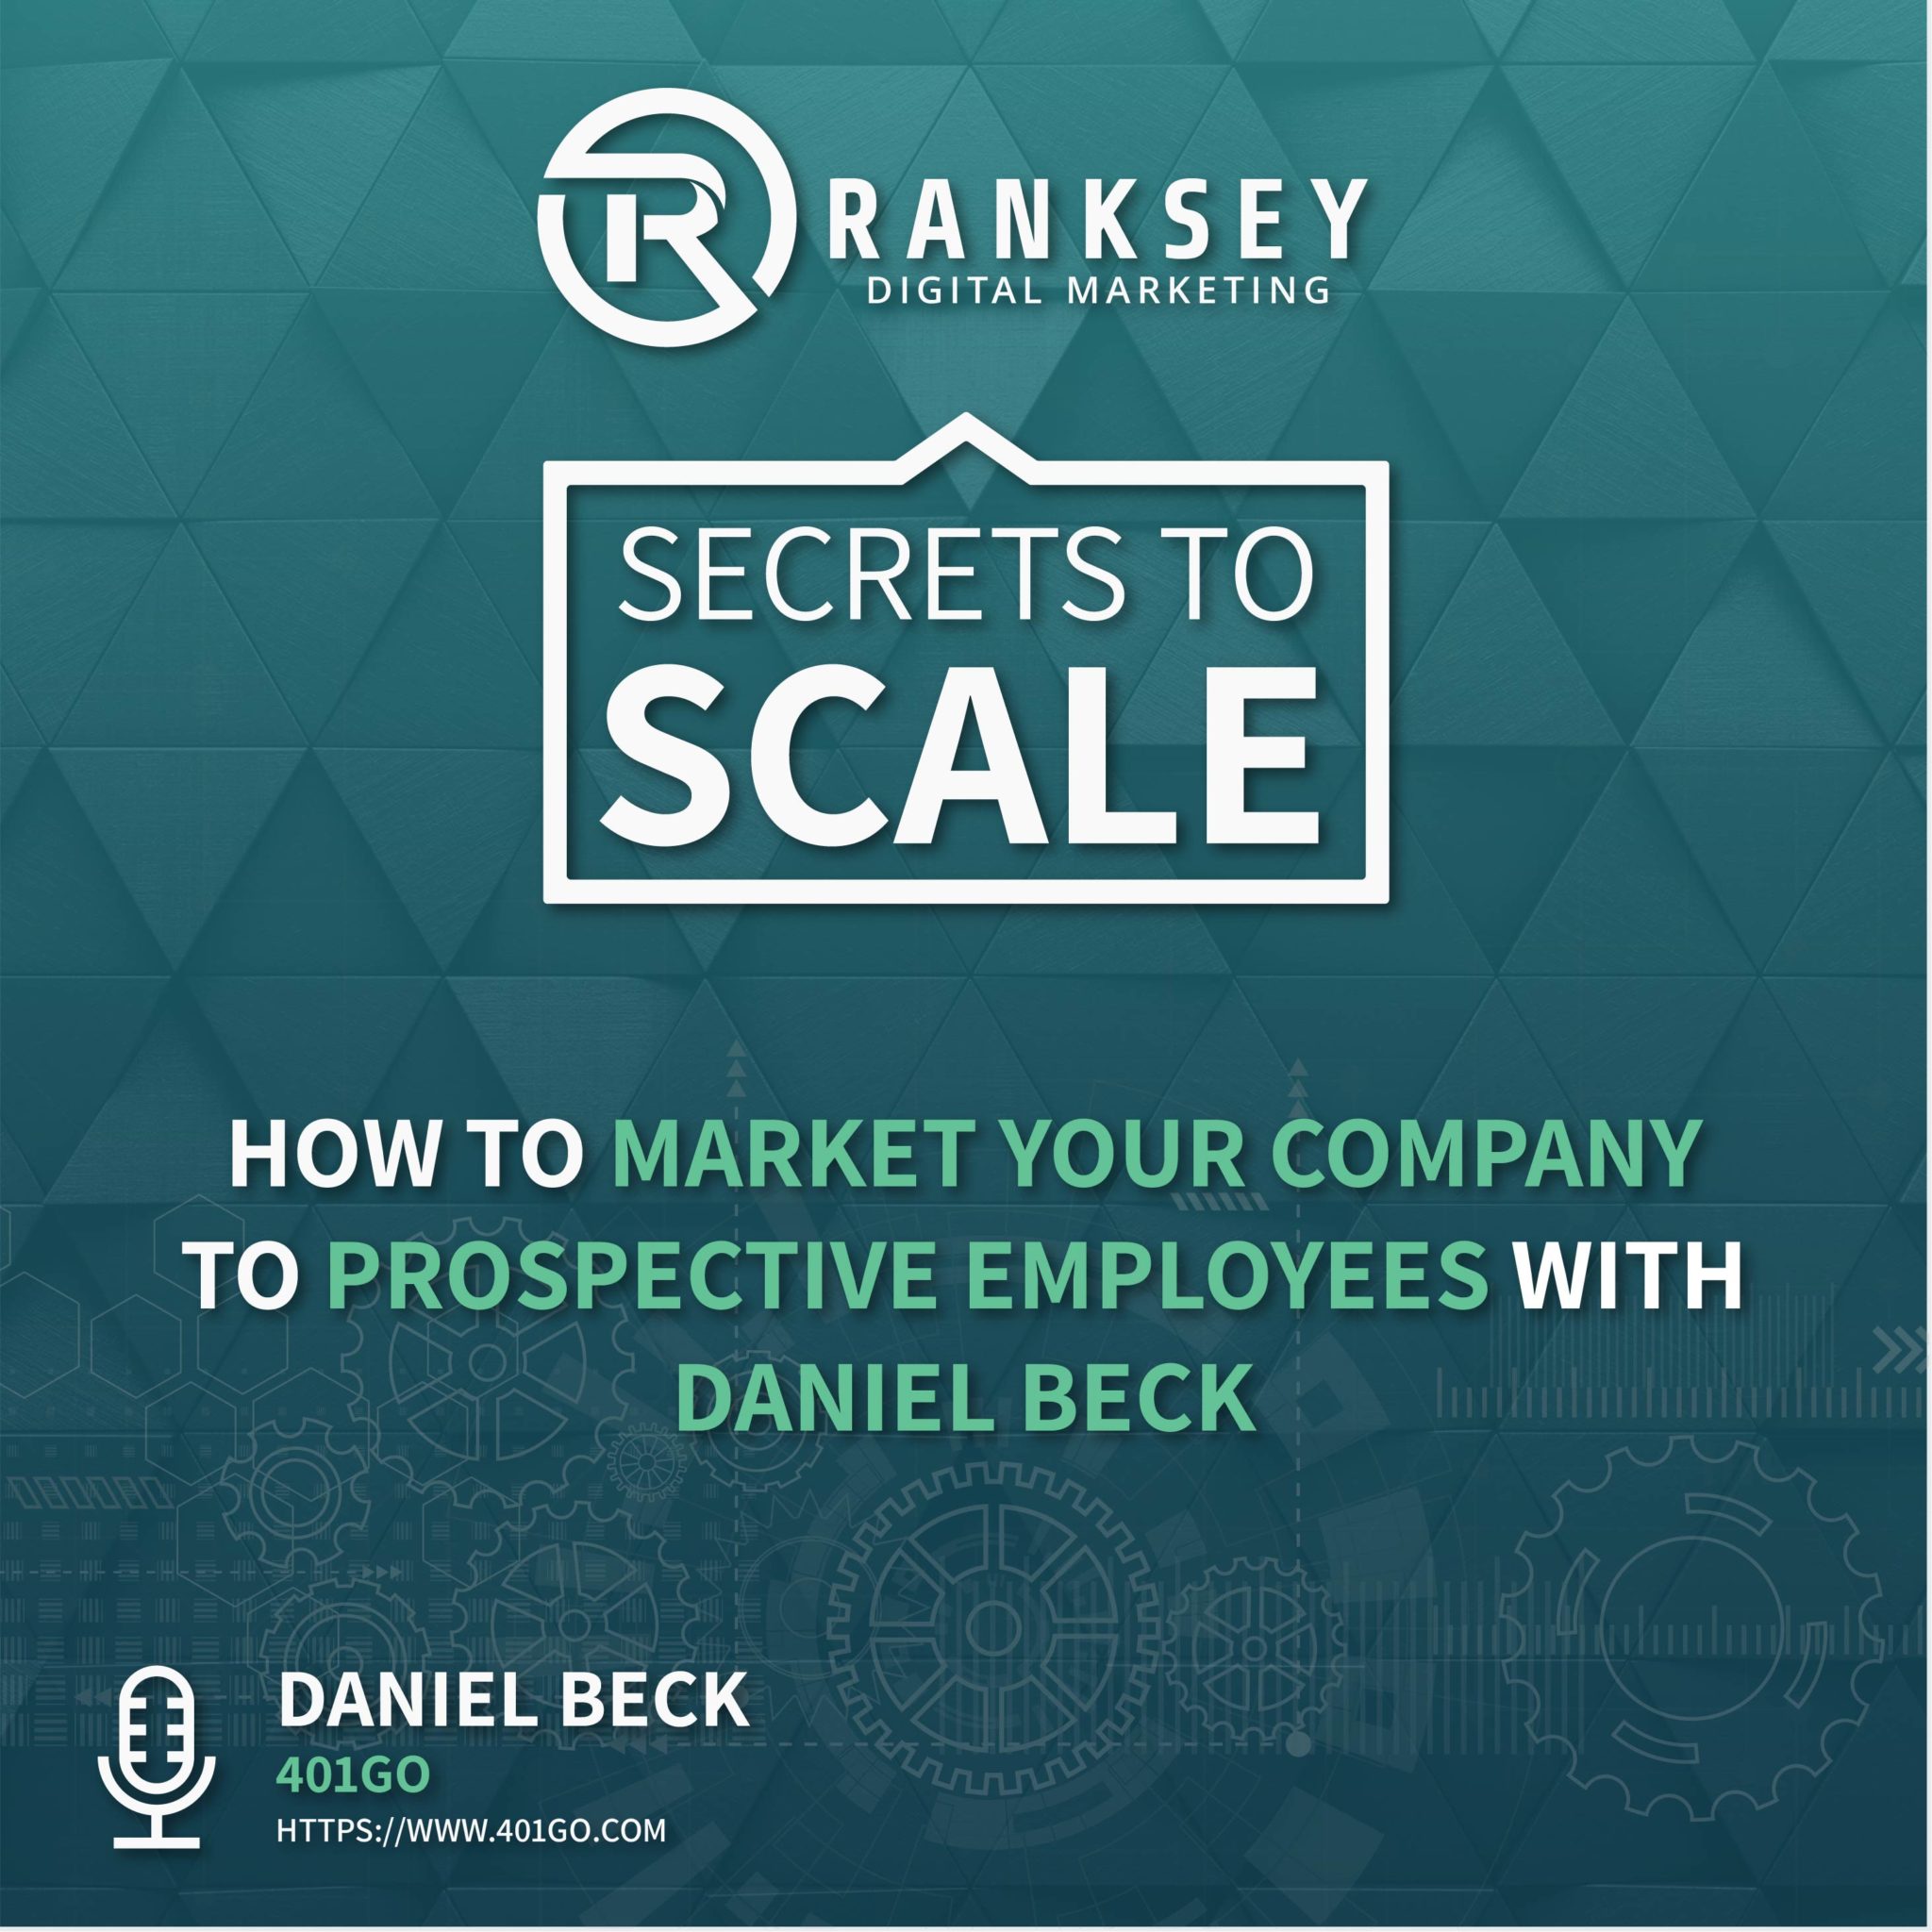 056 - How to Market Your Company to Prospective Employees with Daniel Beck